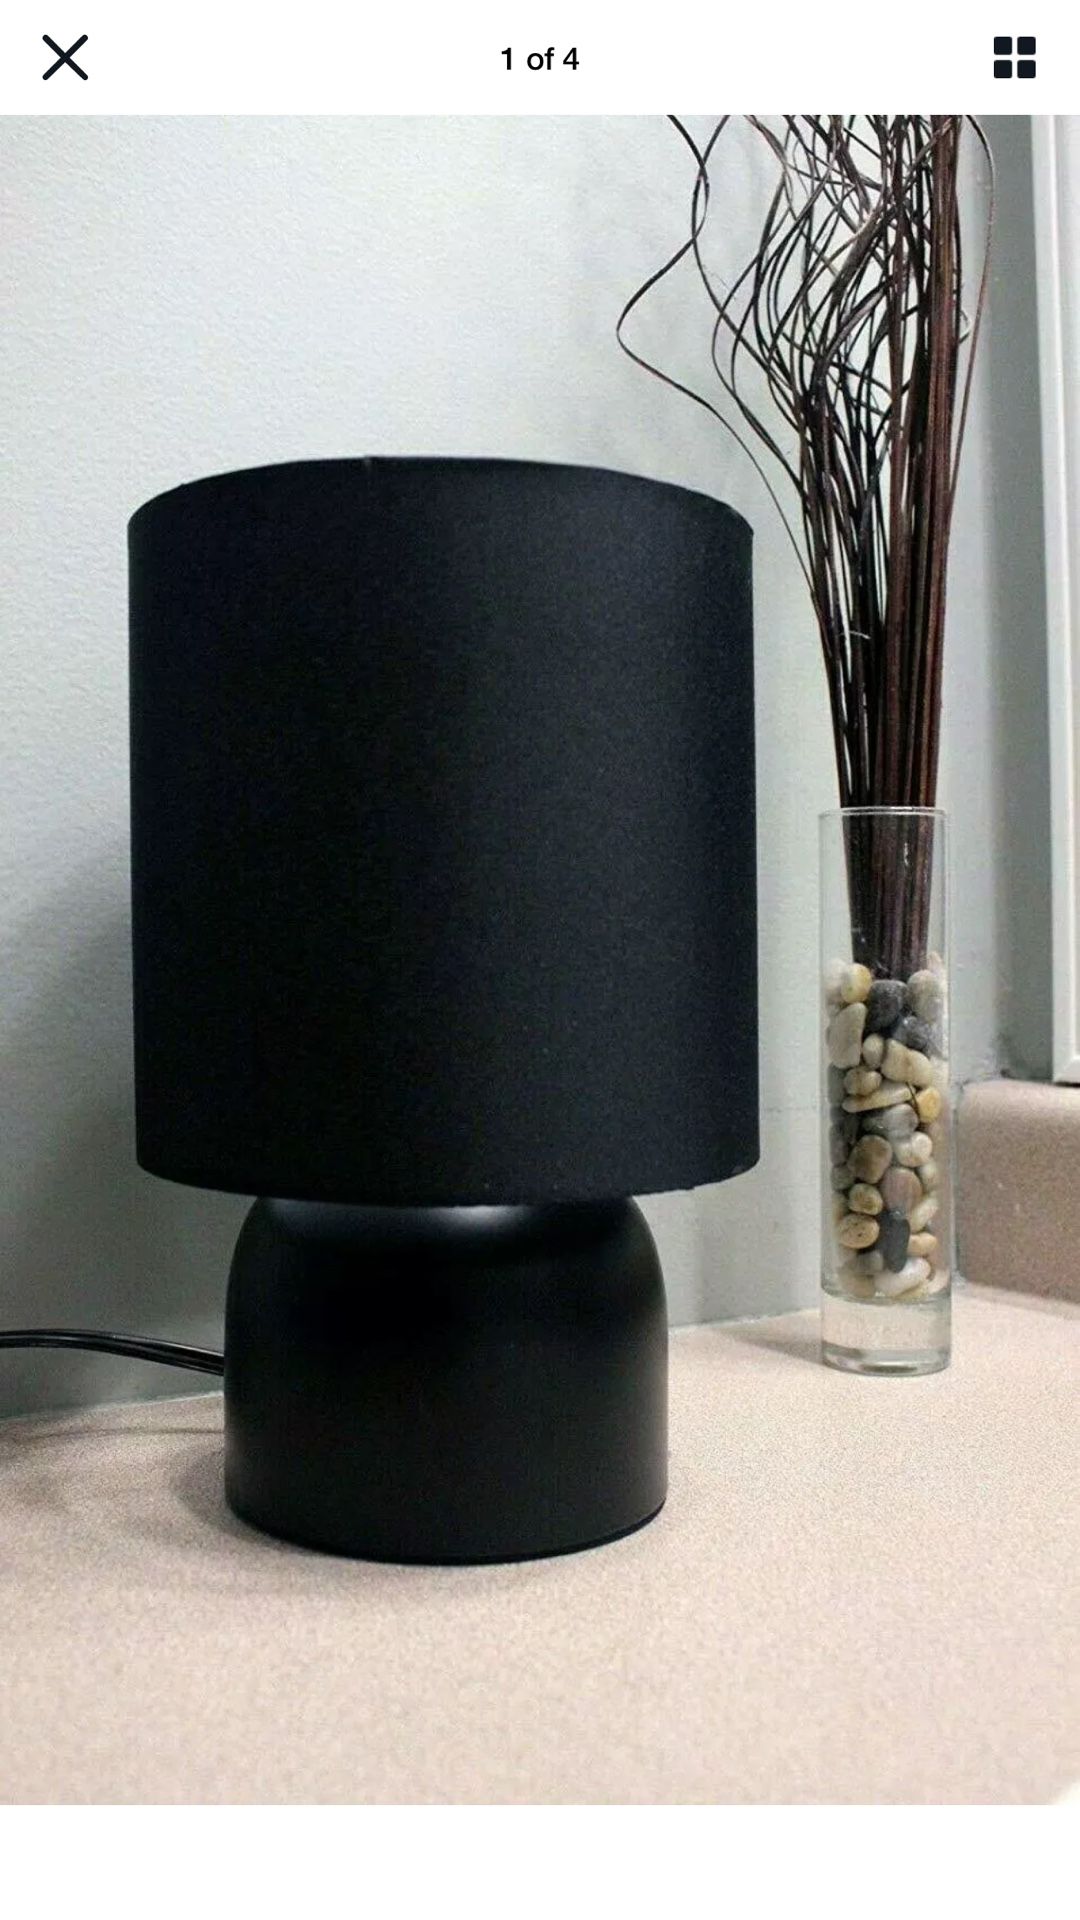 New Sunbeam Modern Table LAMP with Black Fabric Shade and Metal Base Light